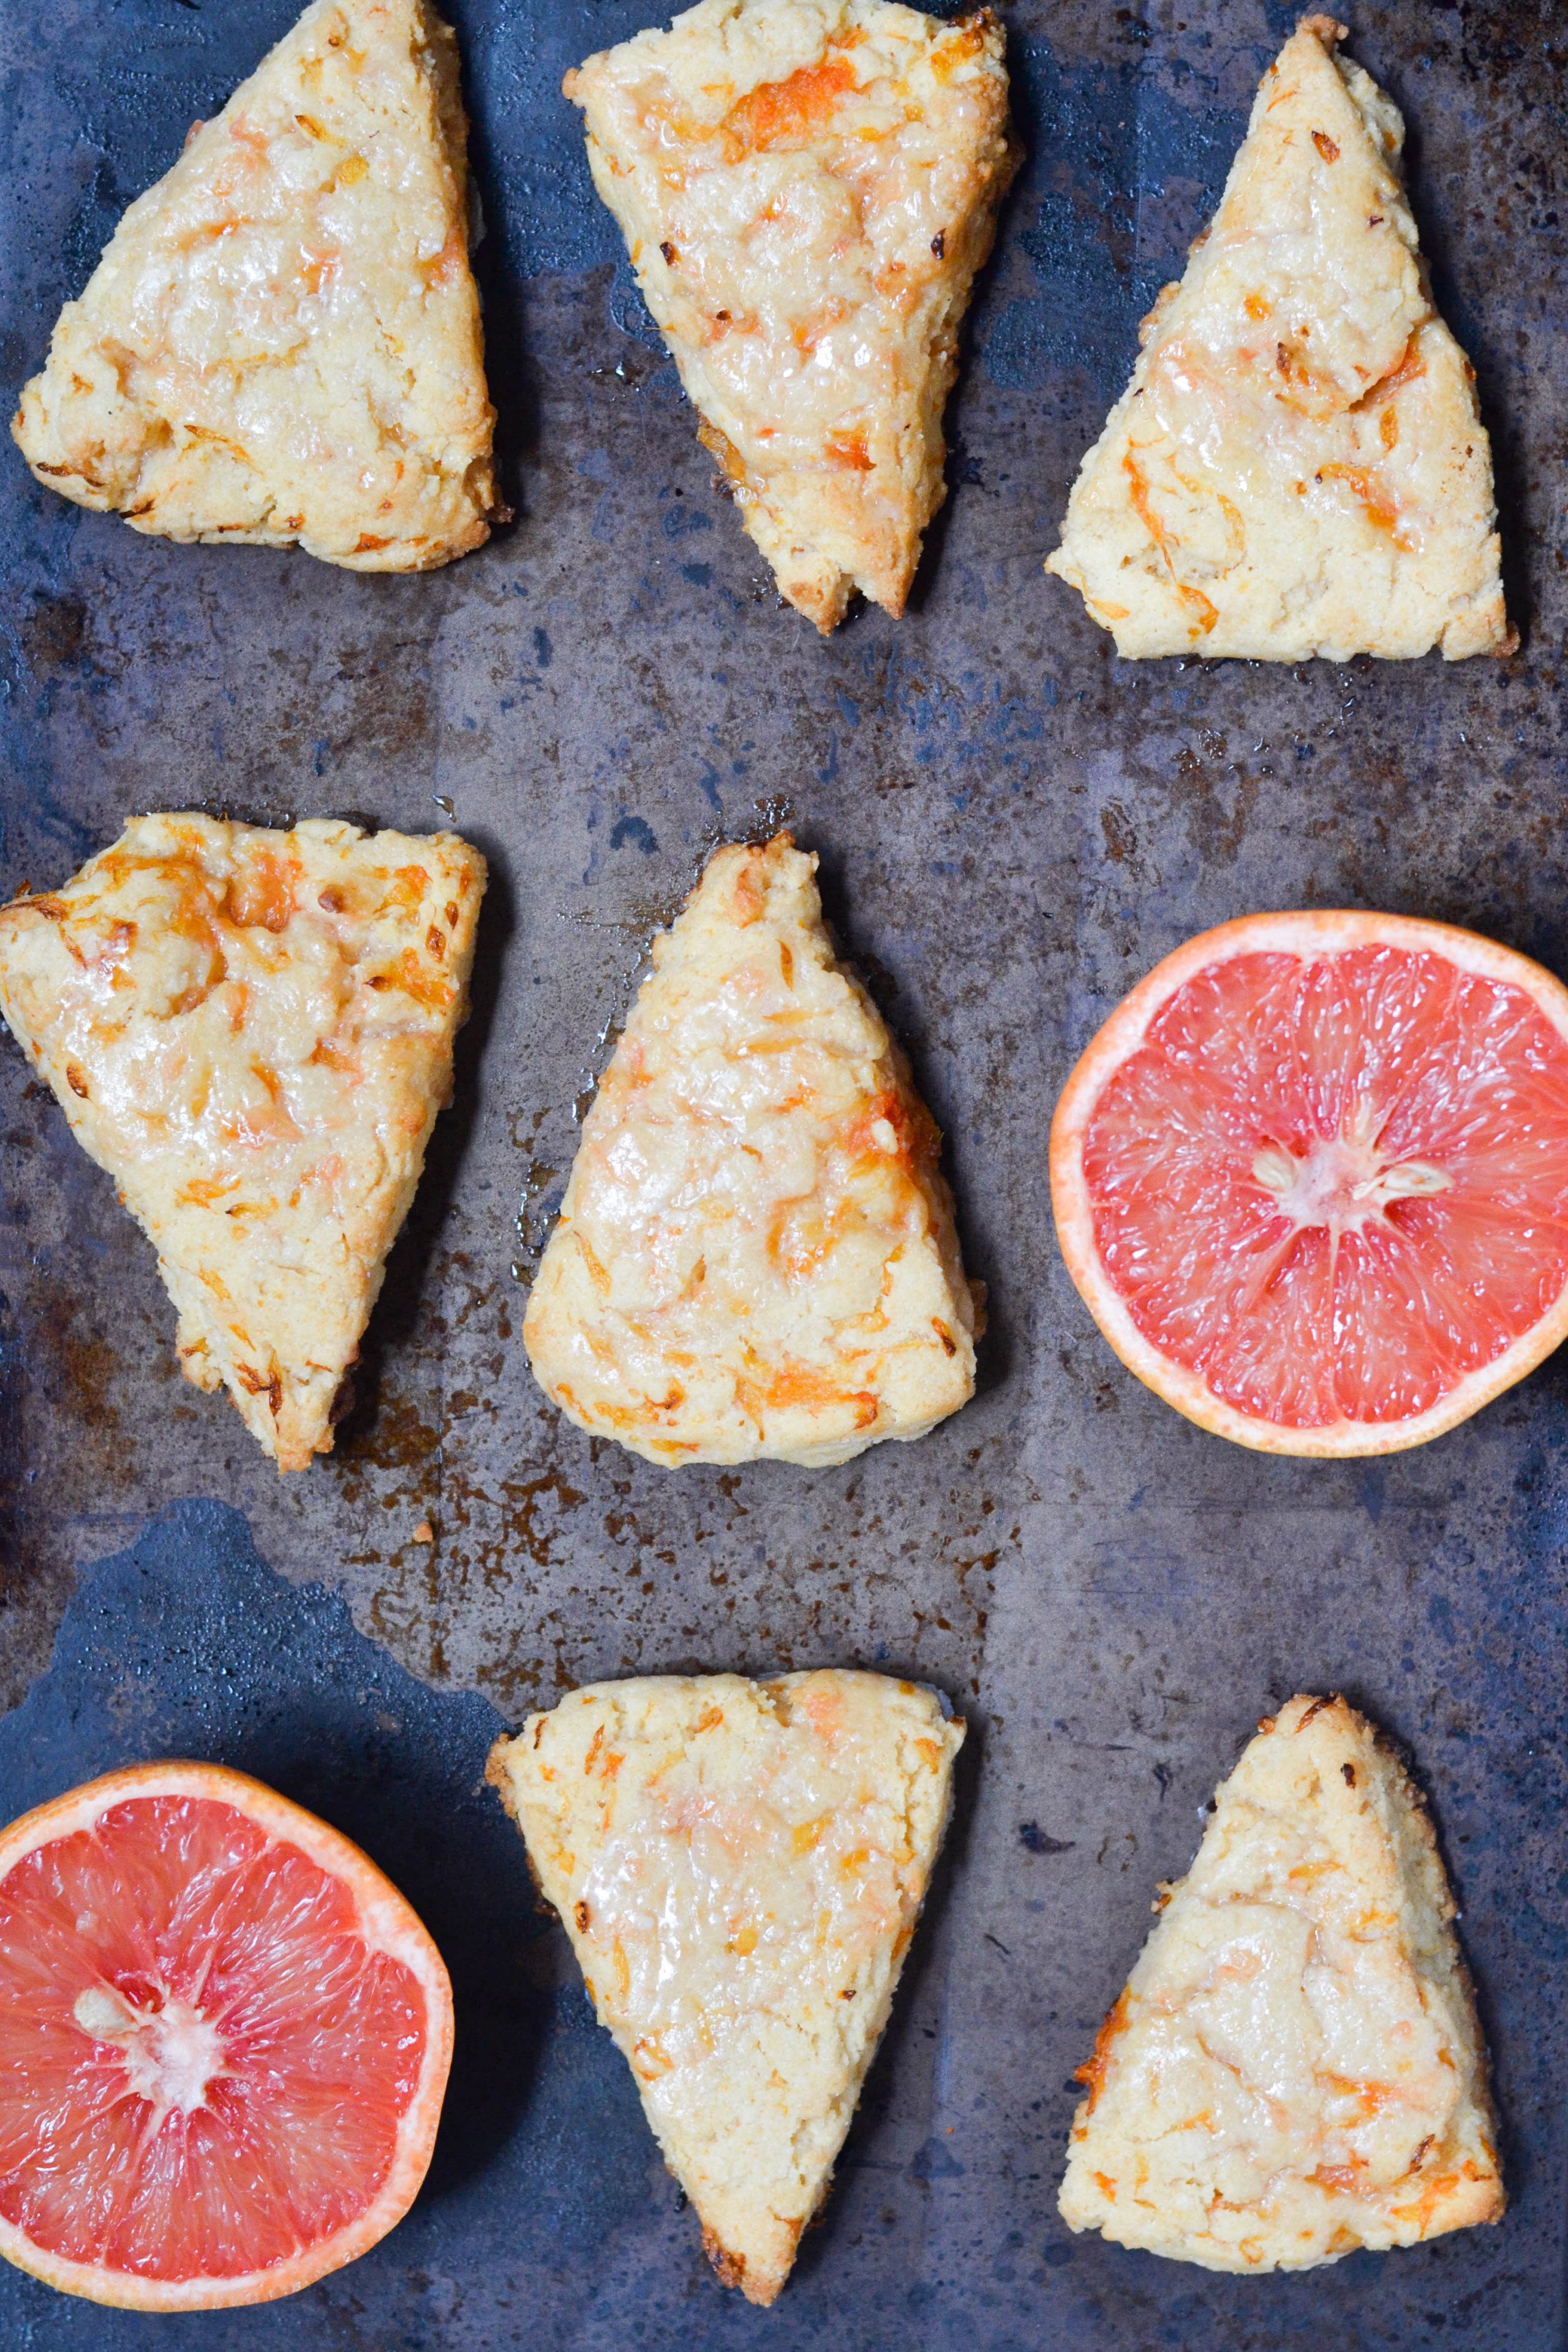 Gluten-free vegan grapefruit scones from A Dash of Megnut. You'll love how tender these scones are!